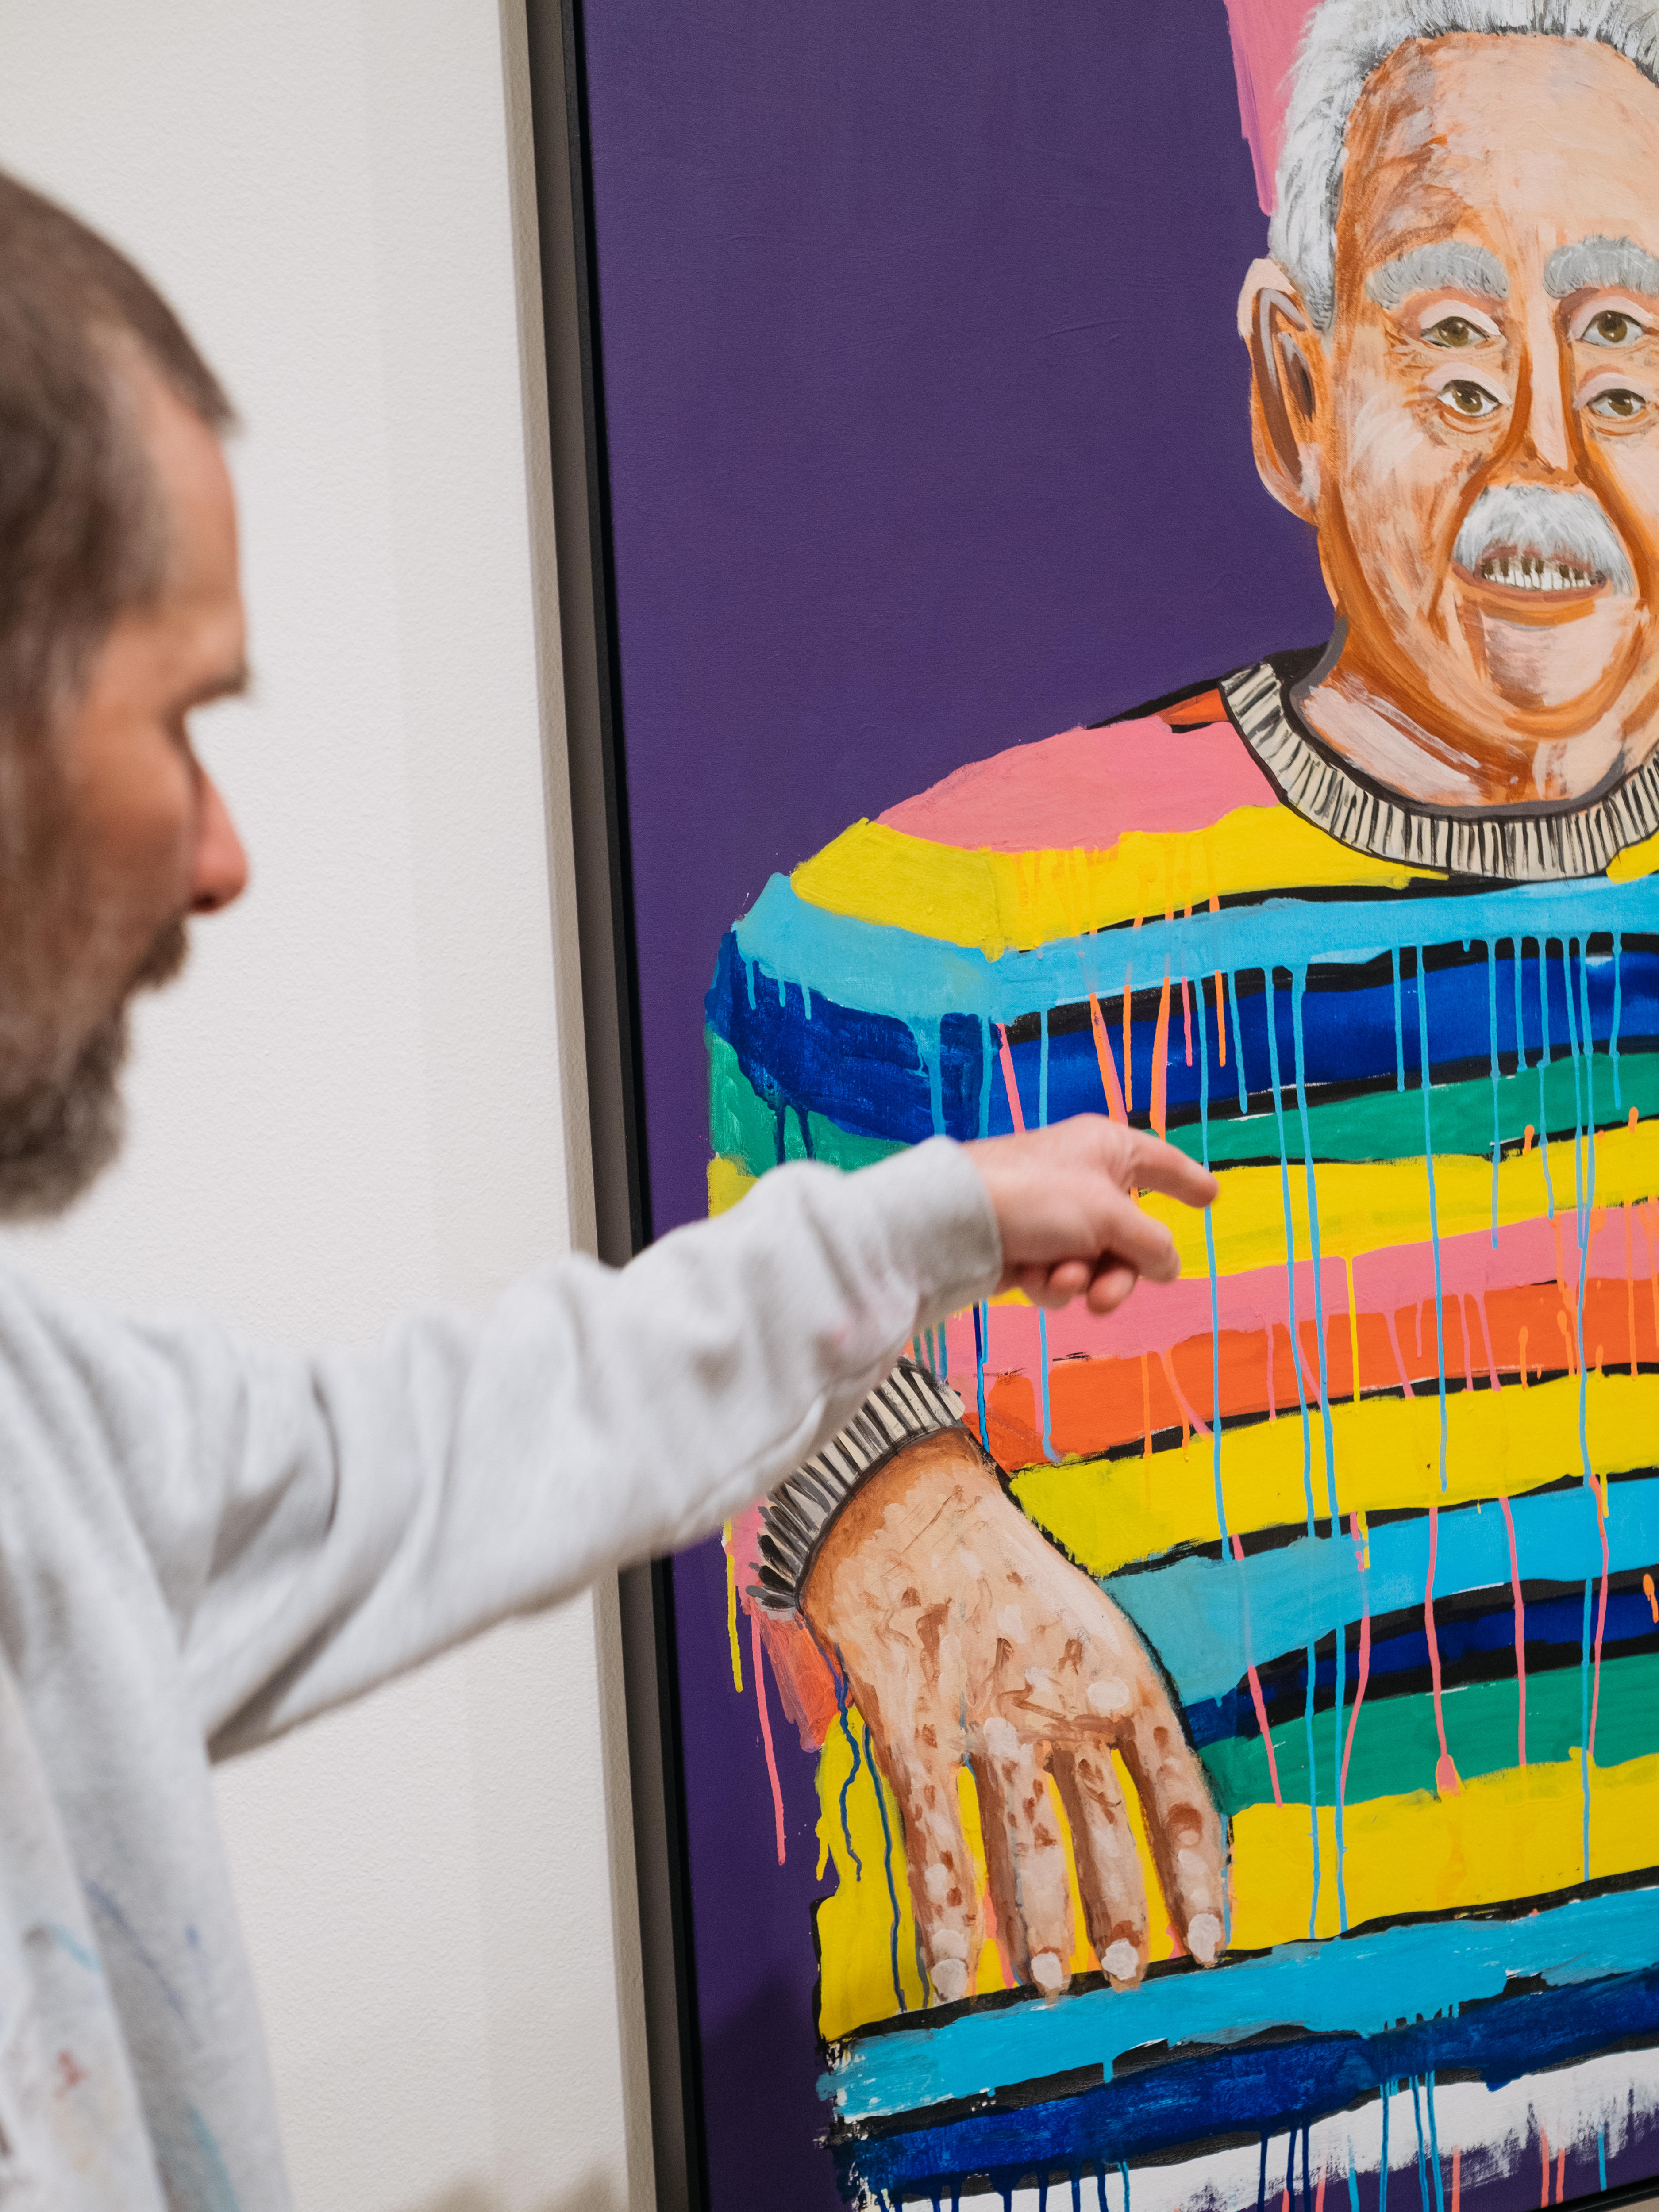 The artist blurred in the foreground points at a section of his vibrantly coloured poirtrait of Ken Done, in the gallery.